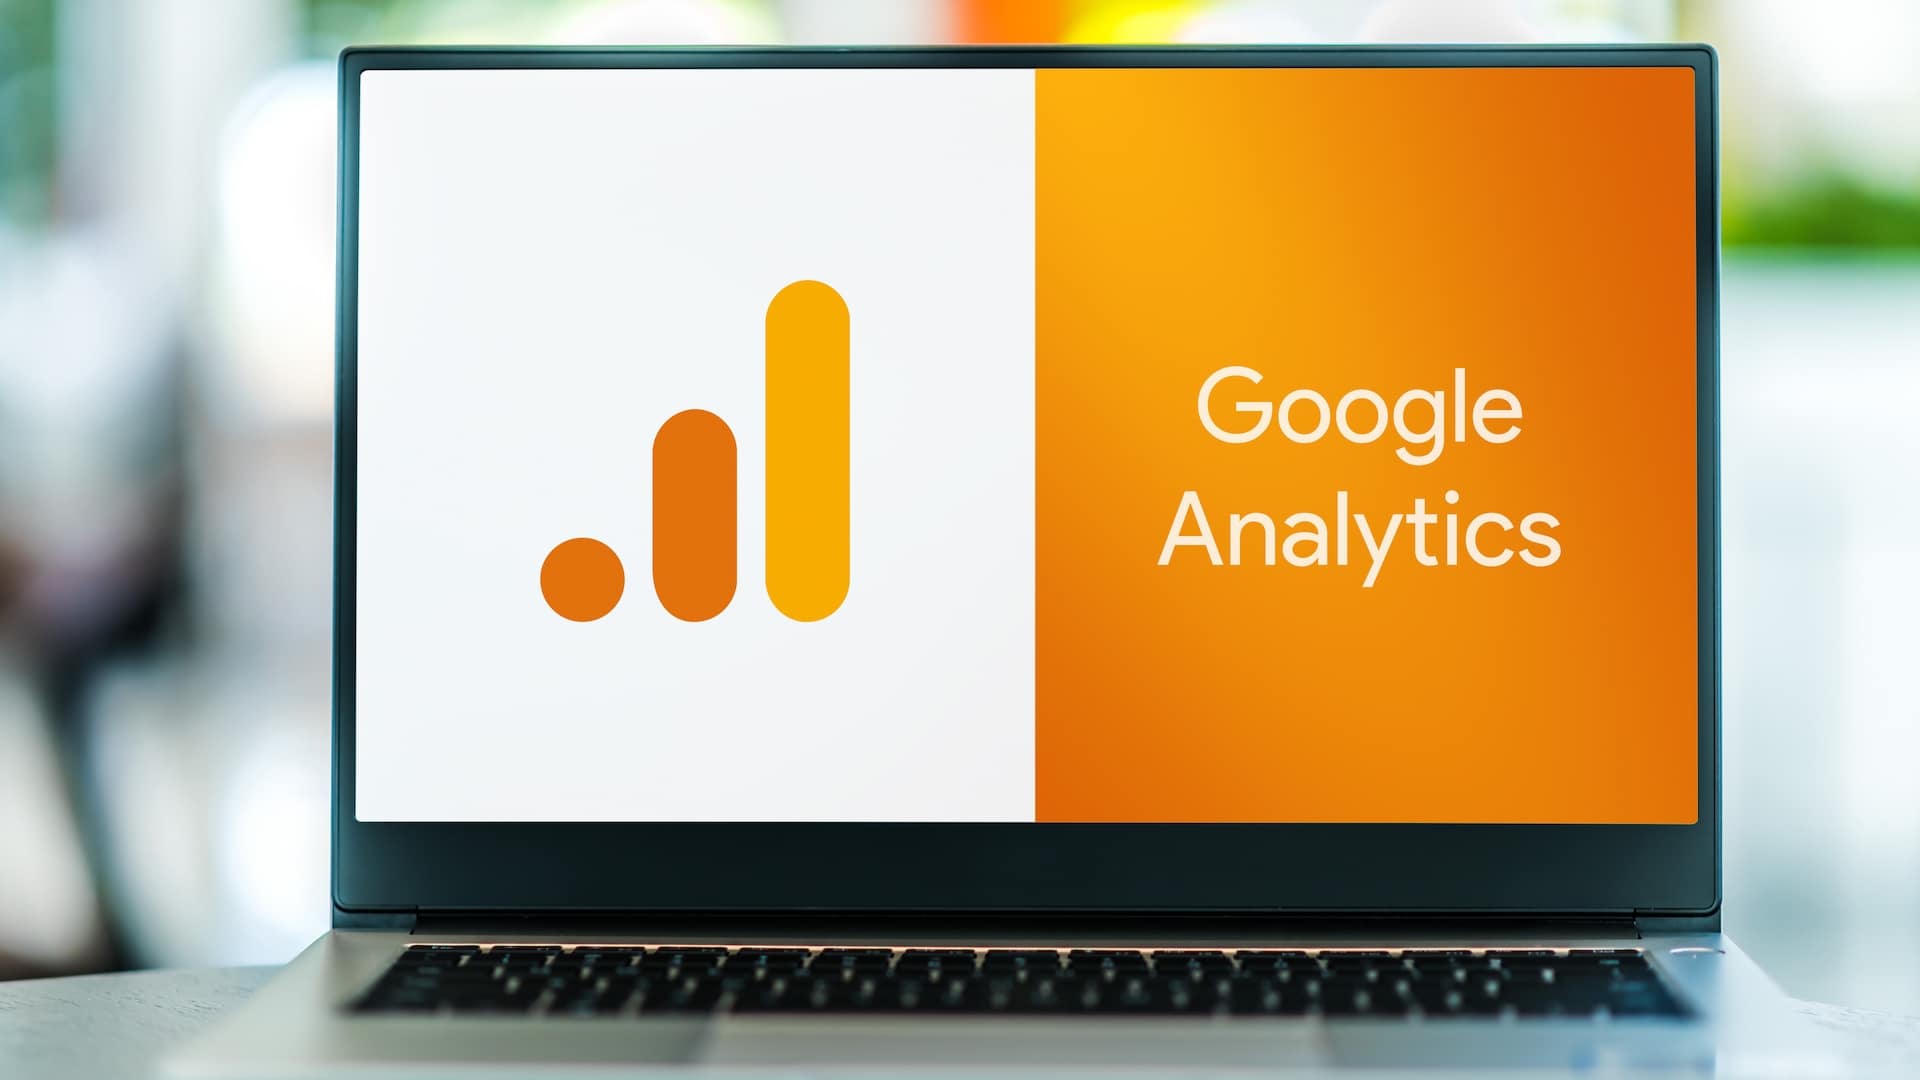 Google Analytics 4 adds new features to improve data security and report accuracy